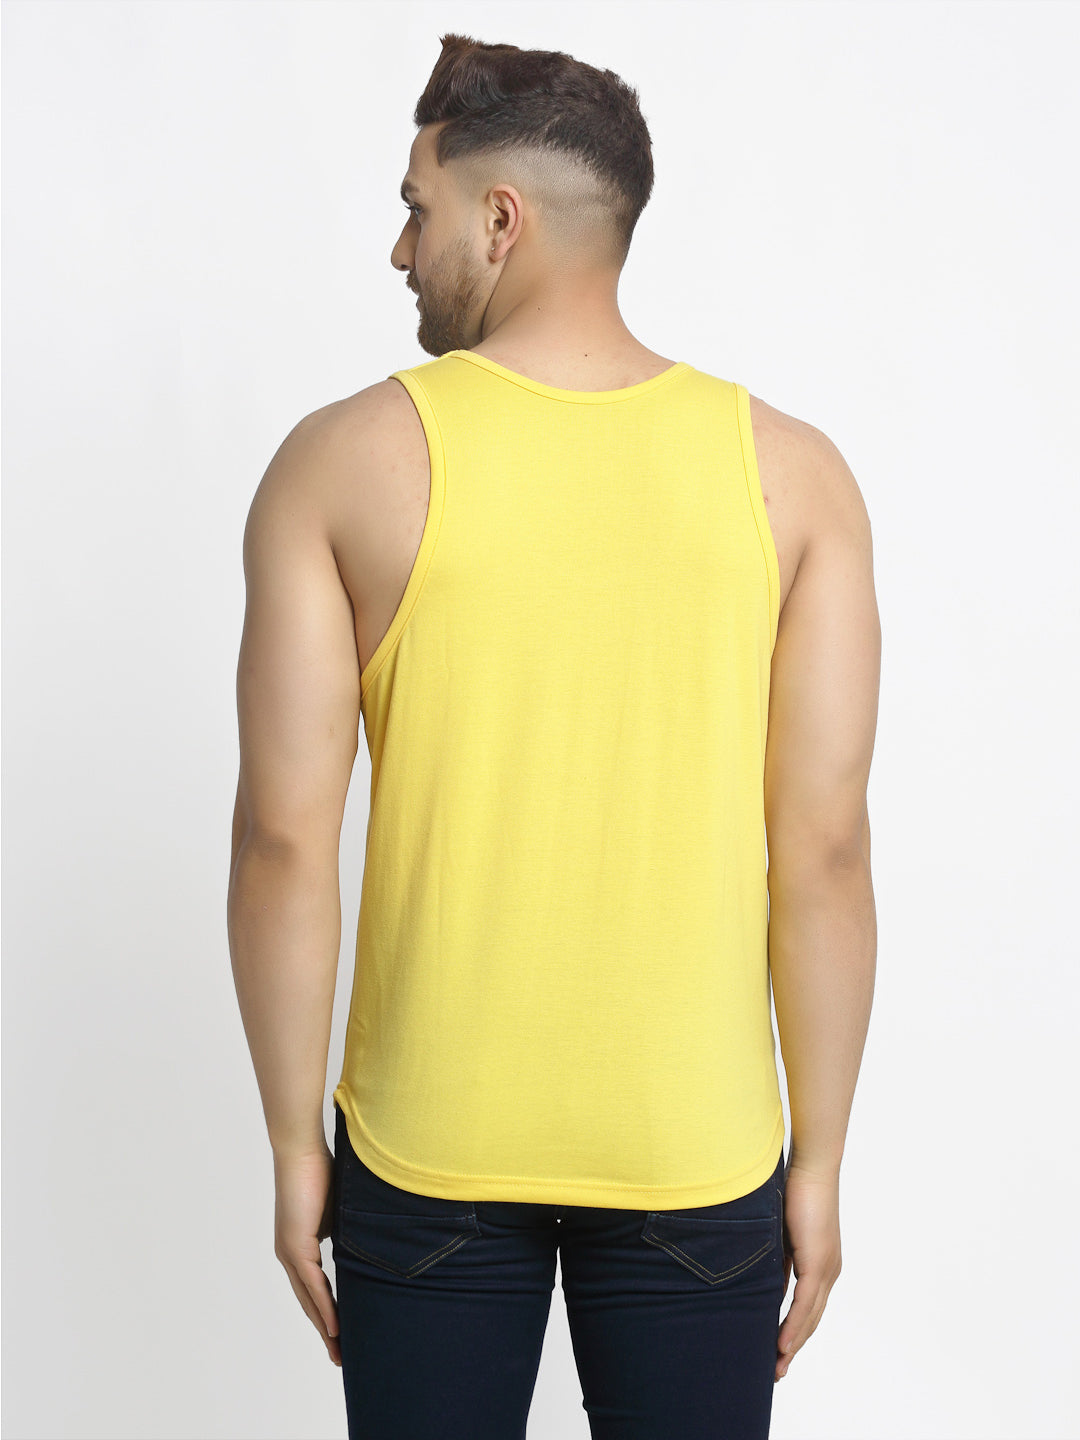 Men's Pack of 2 Navy & Yellow Printed Gym Vest - Friskers